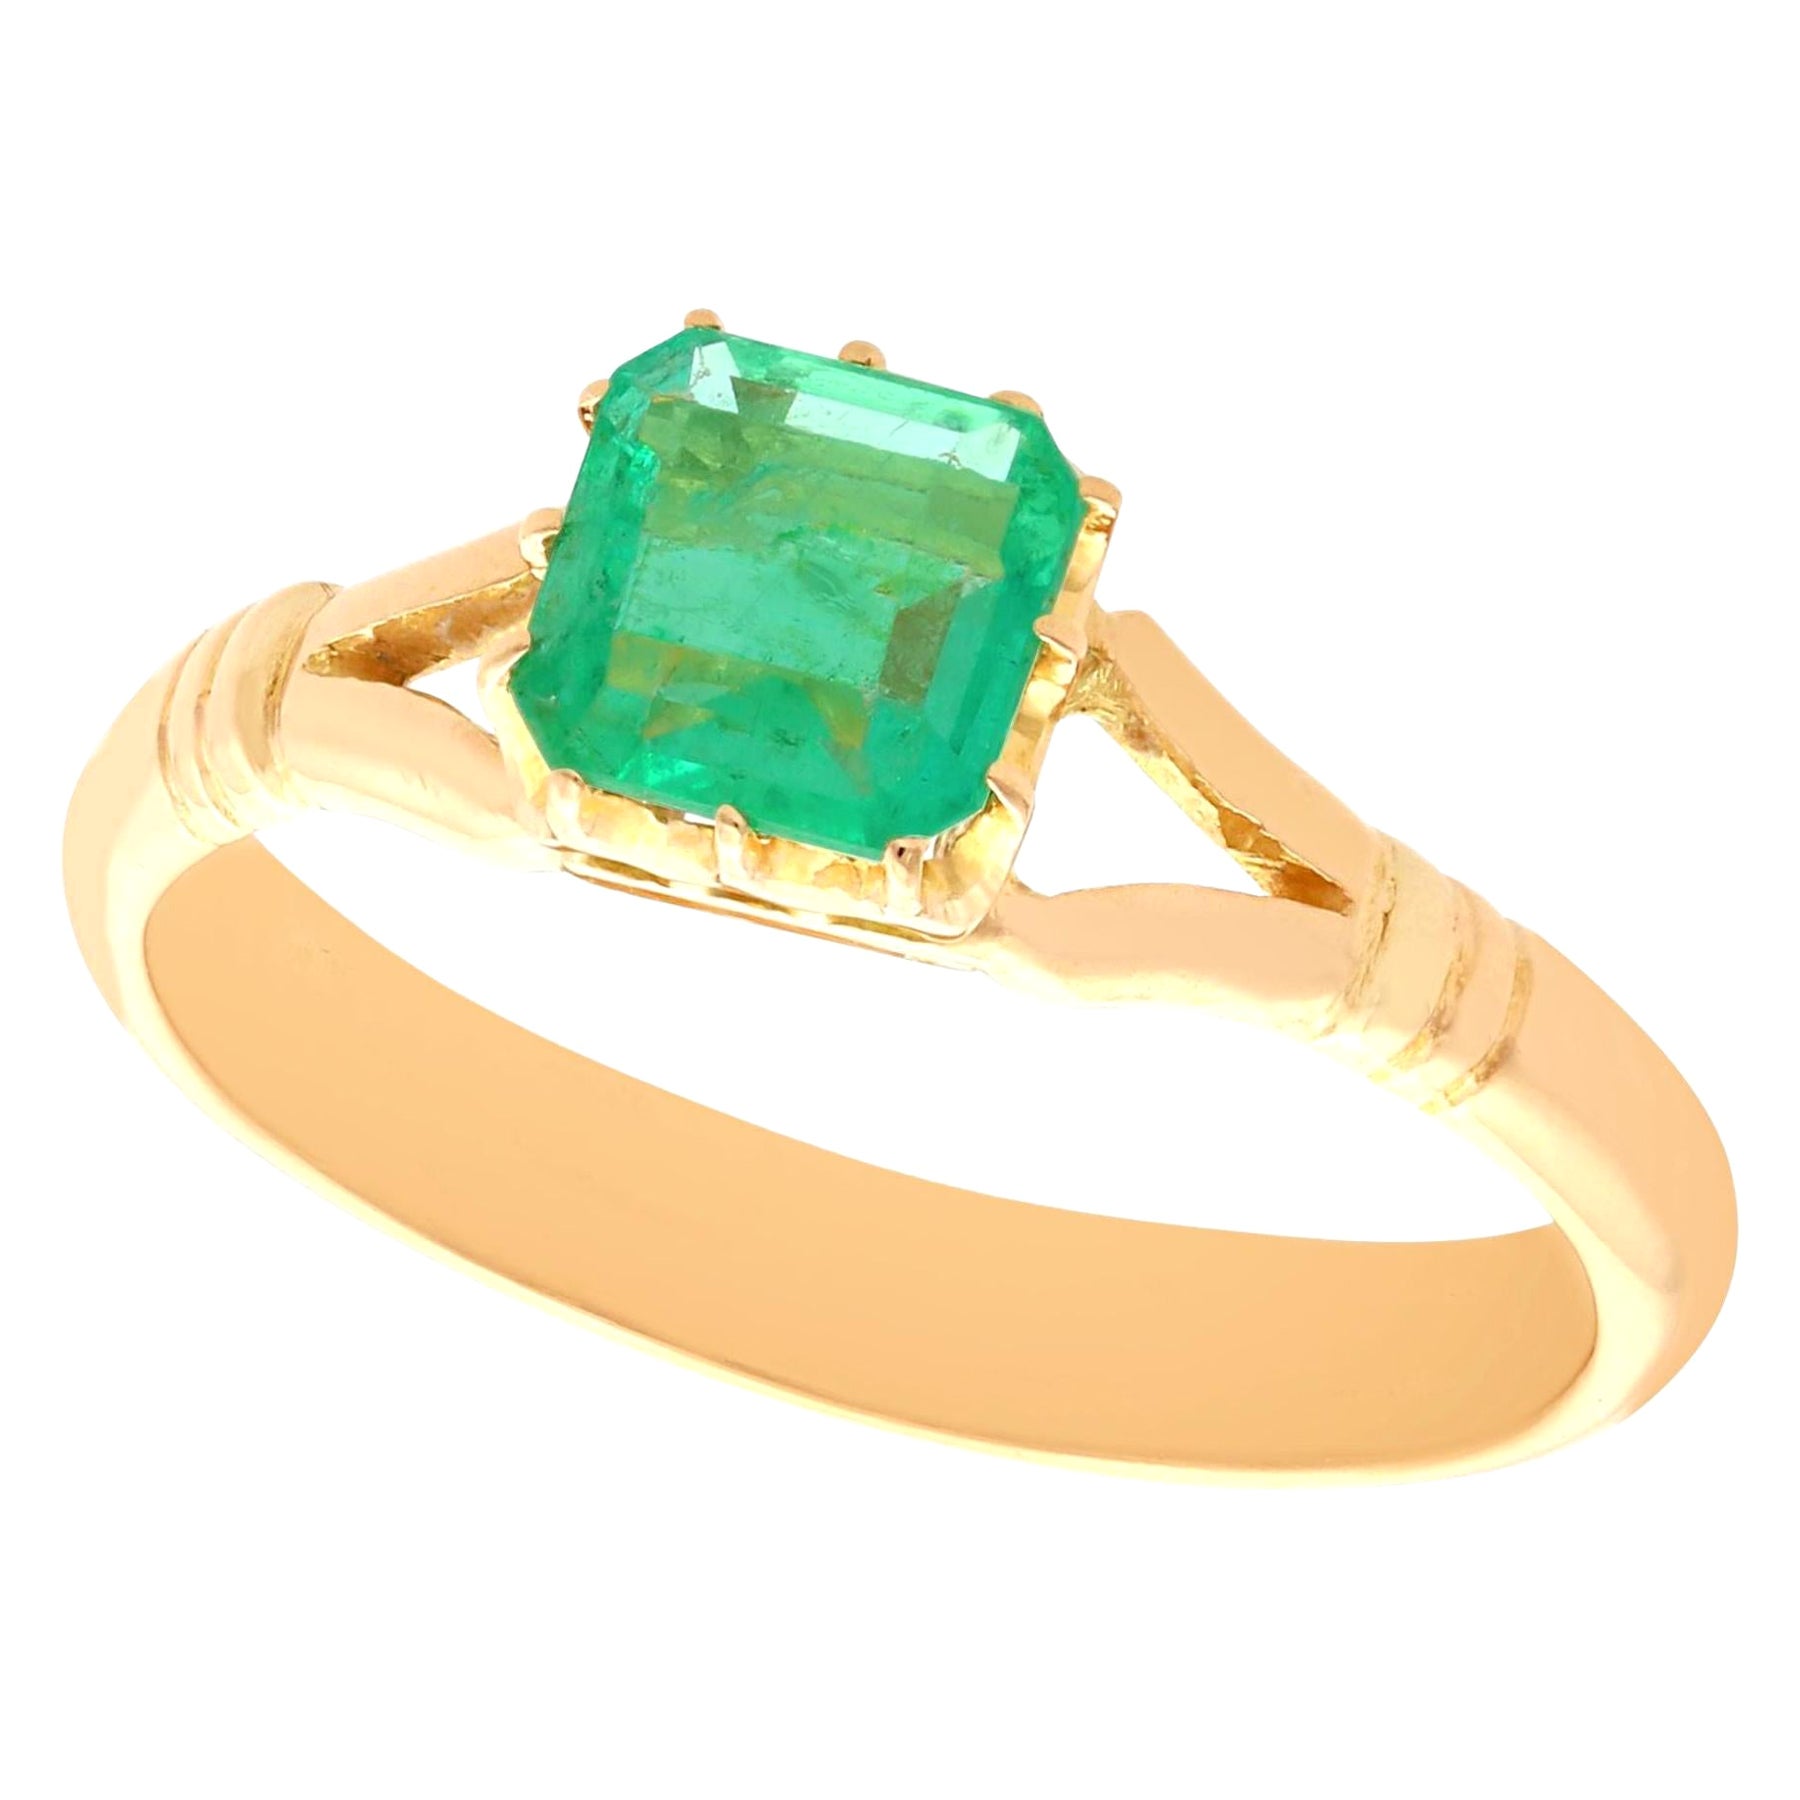 Antique 0.79 Carat Emerald and Yellow Gold Engagement Ring